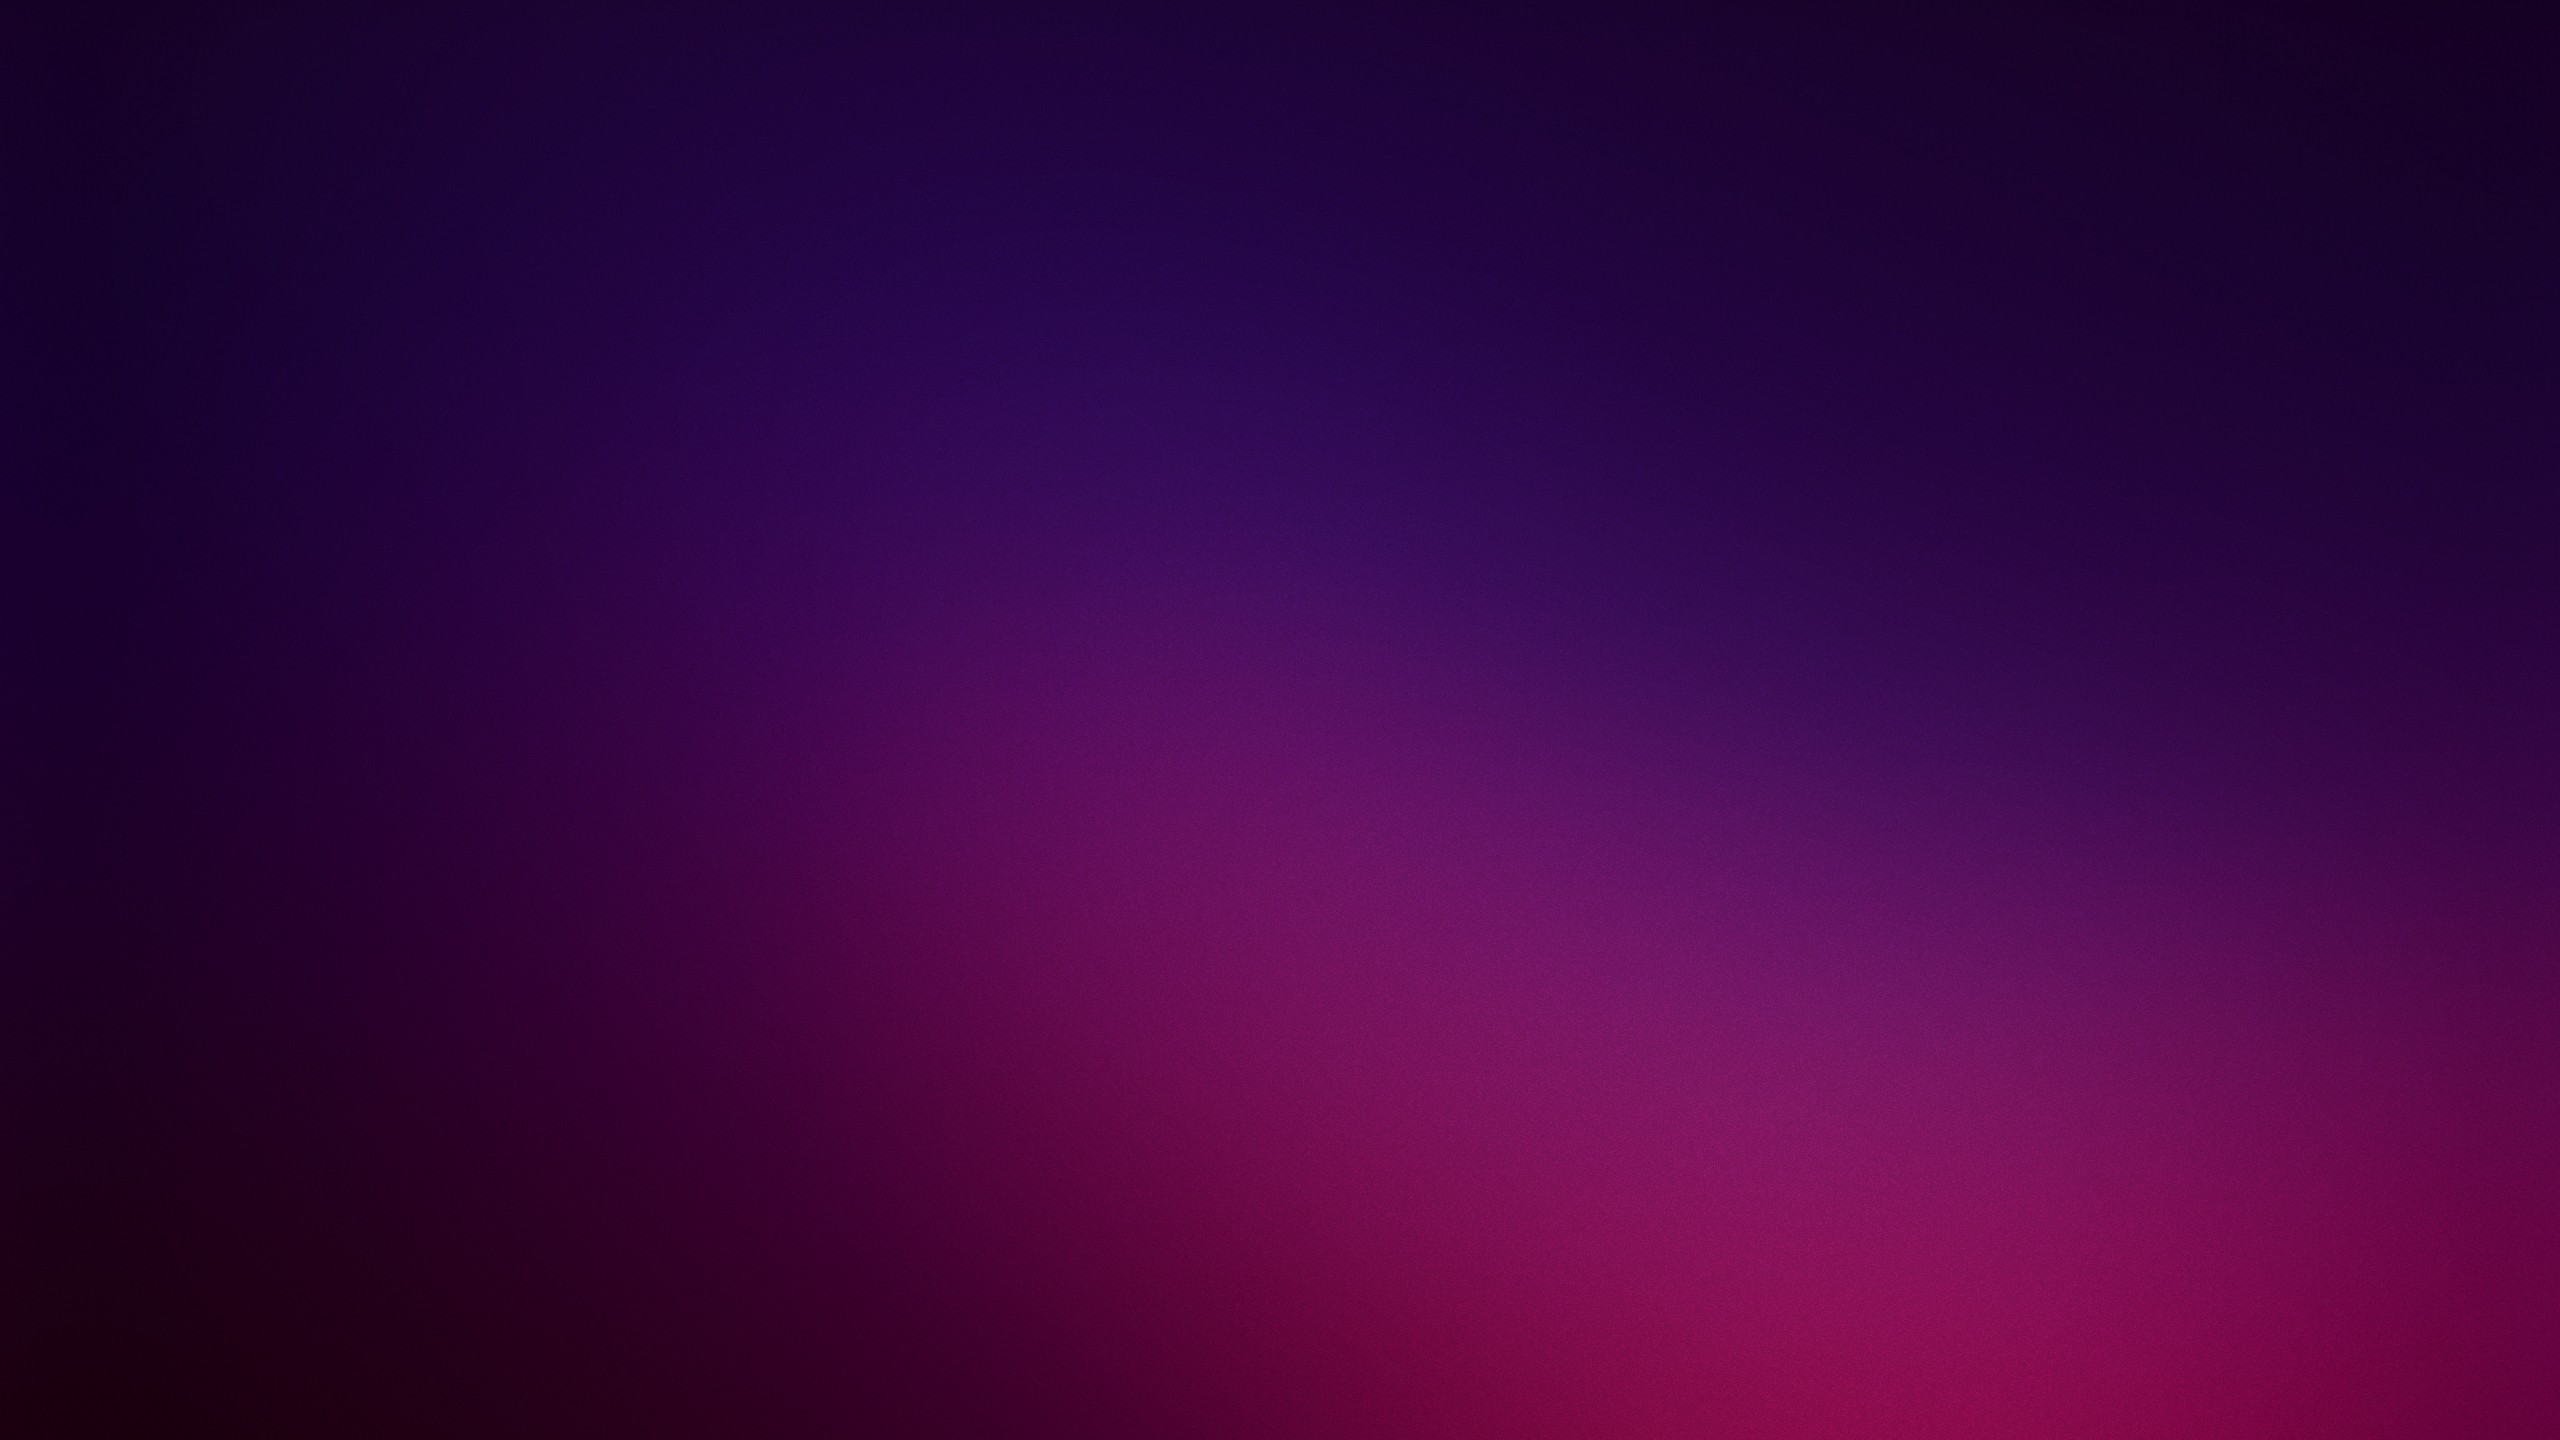 Free Download Purple Color Background Wallpaper Best Hd Wallpapers 2560x1440 For Your Desktop Mobile Tablet Explore 71 Color Hd Wallpaper Cool Color Wallpaper Color Wallpaper Background One Color Wallpapers